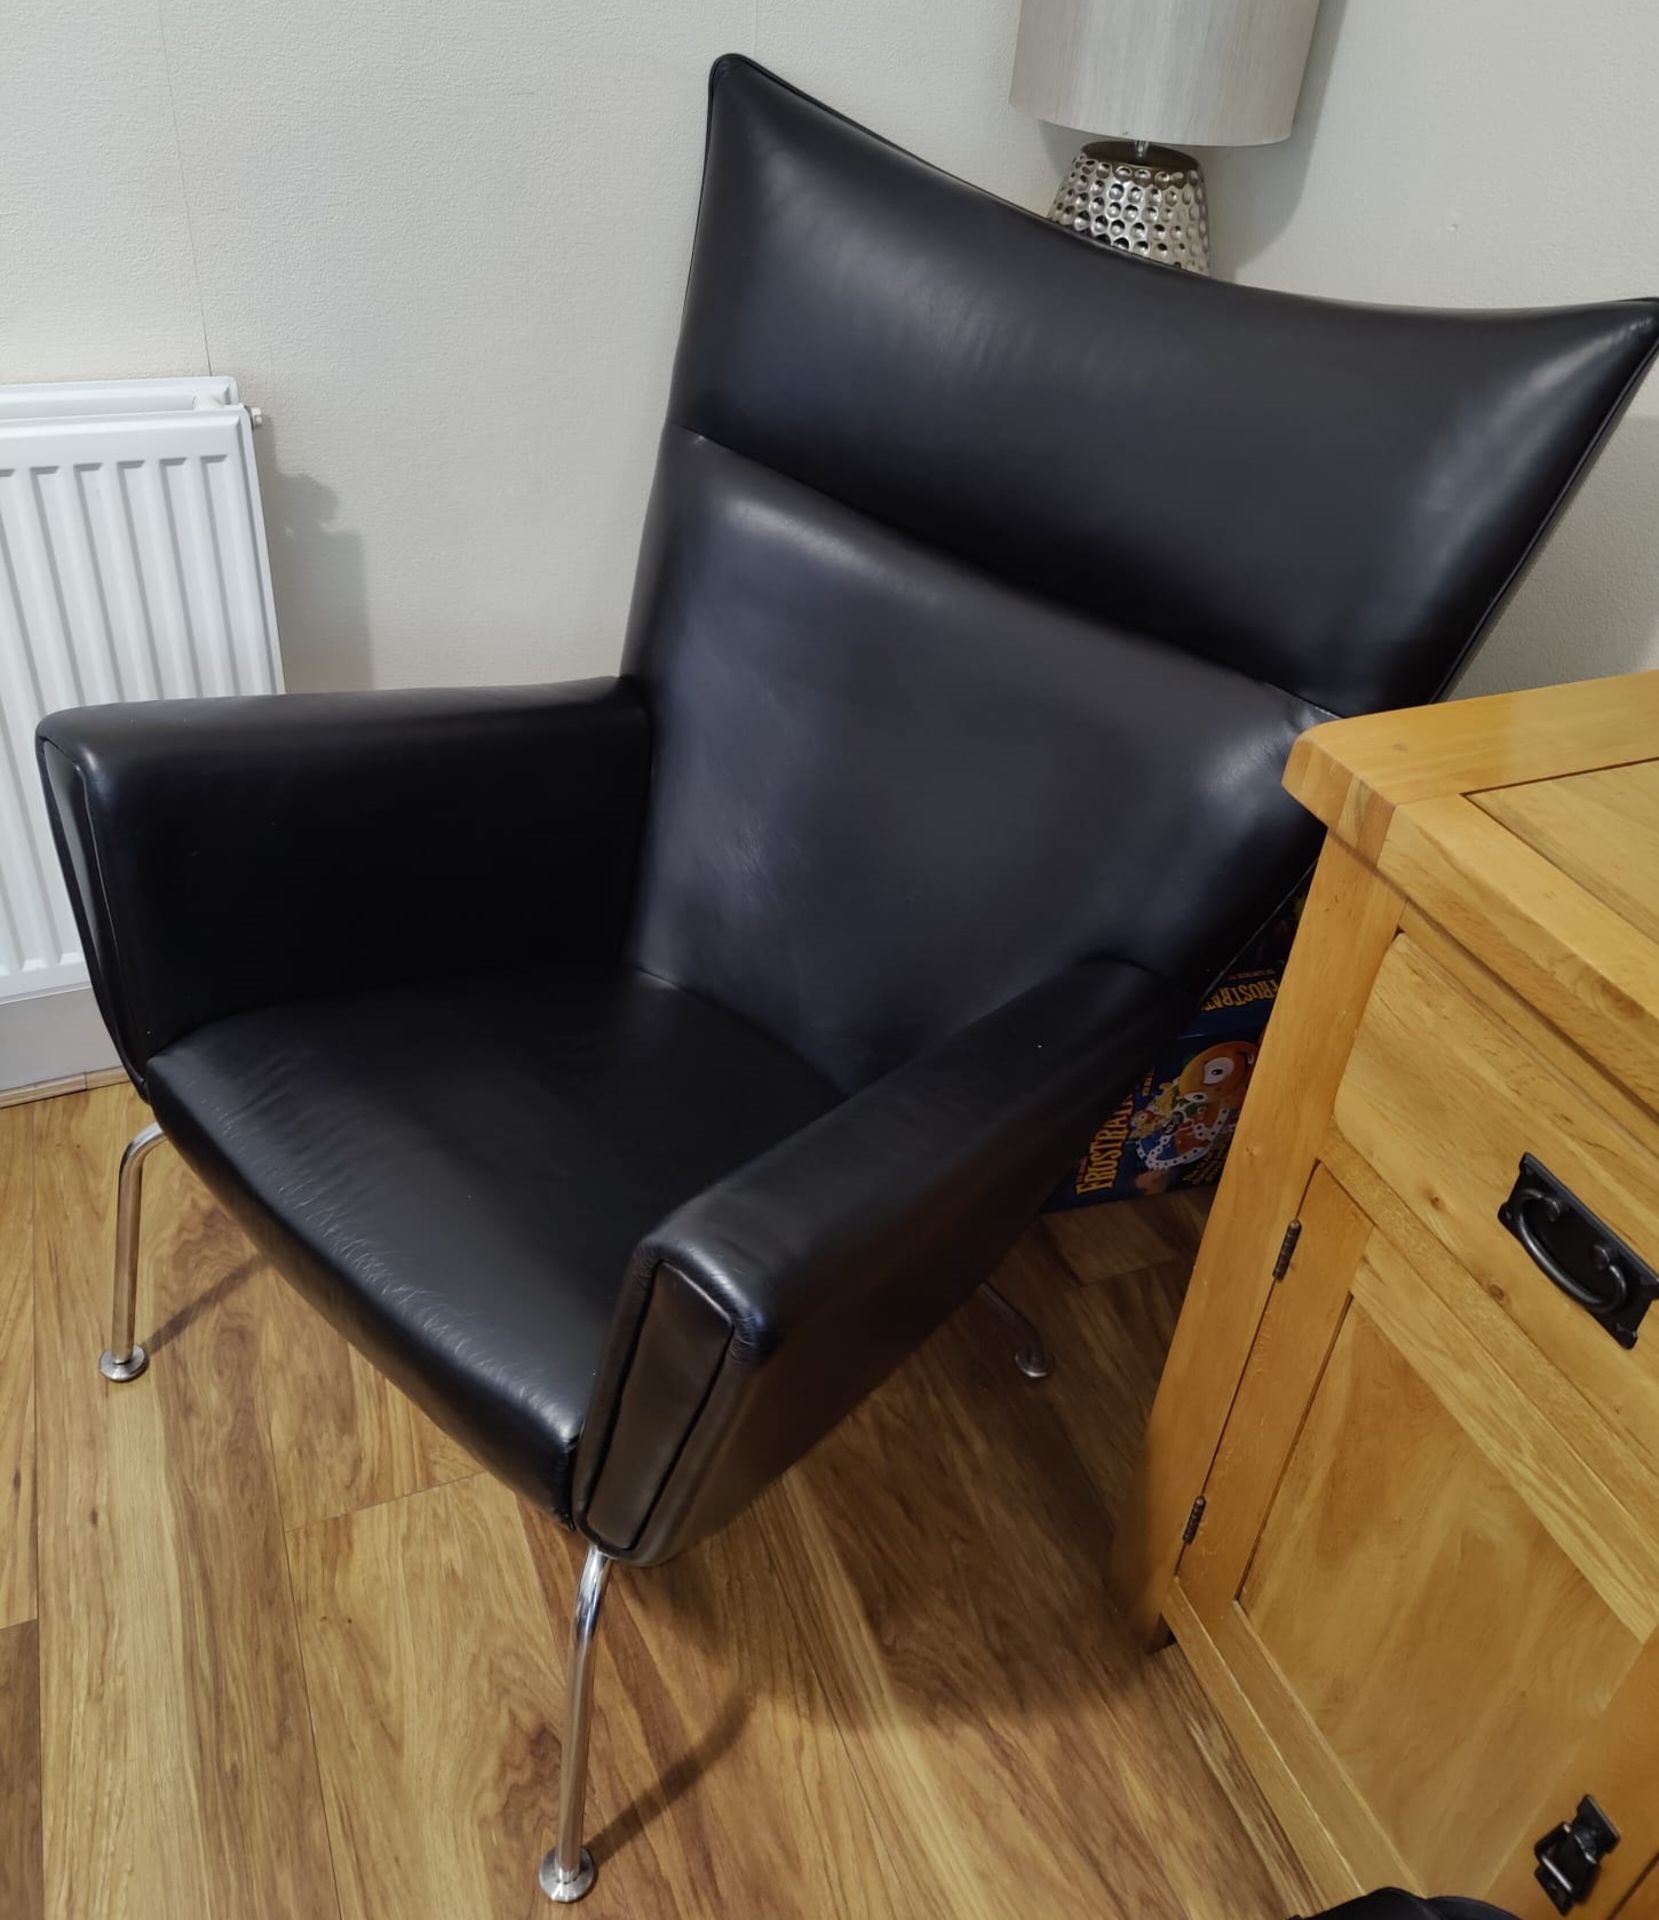 1 x Hans Wegner Inspired Wing Arm Chair - Genuine Black Leather Upholstery - Image 5 of 11